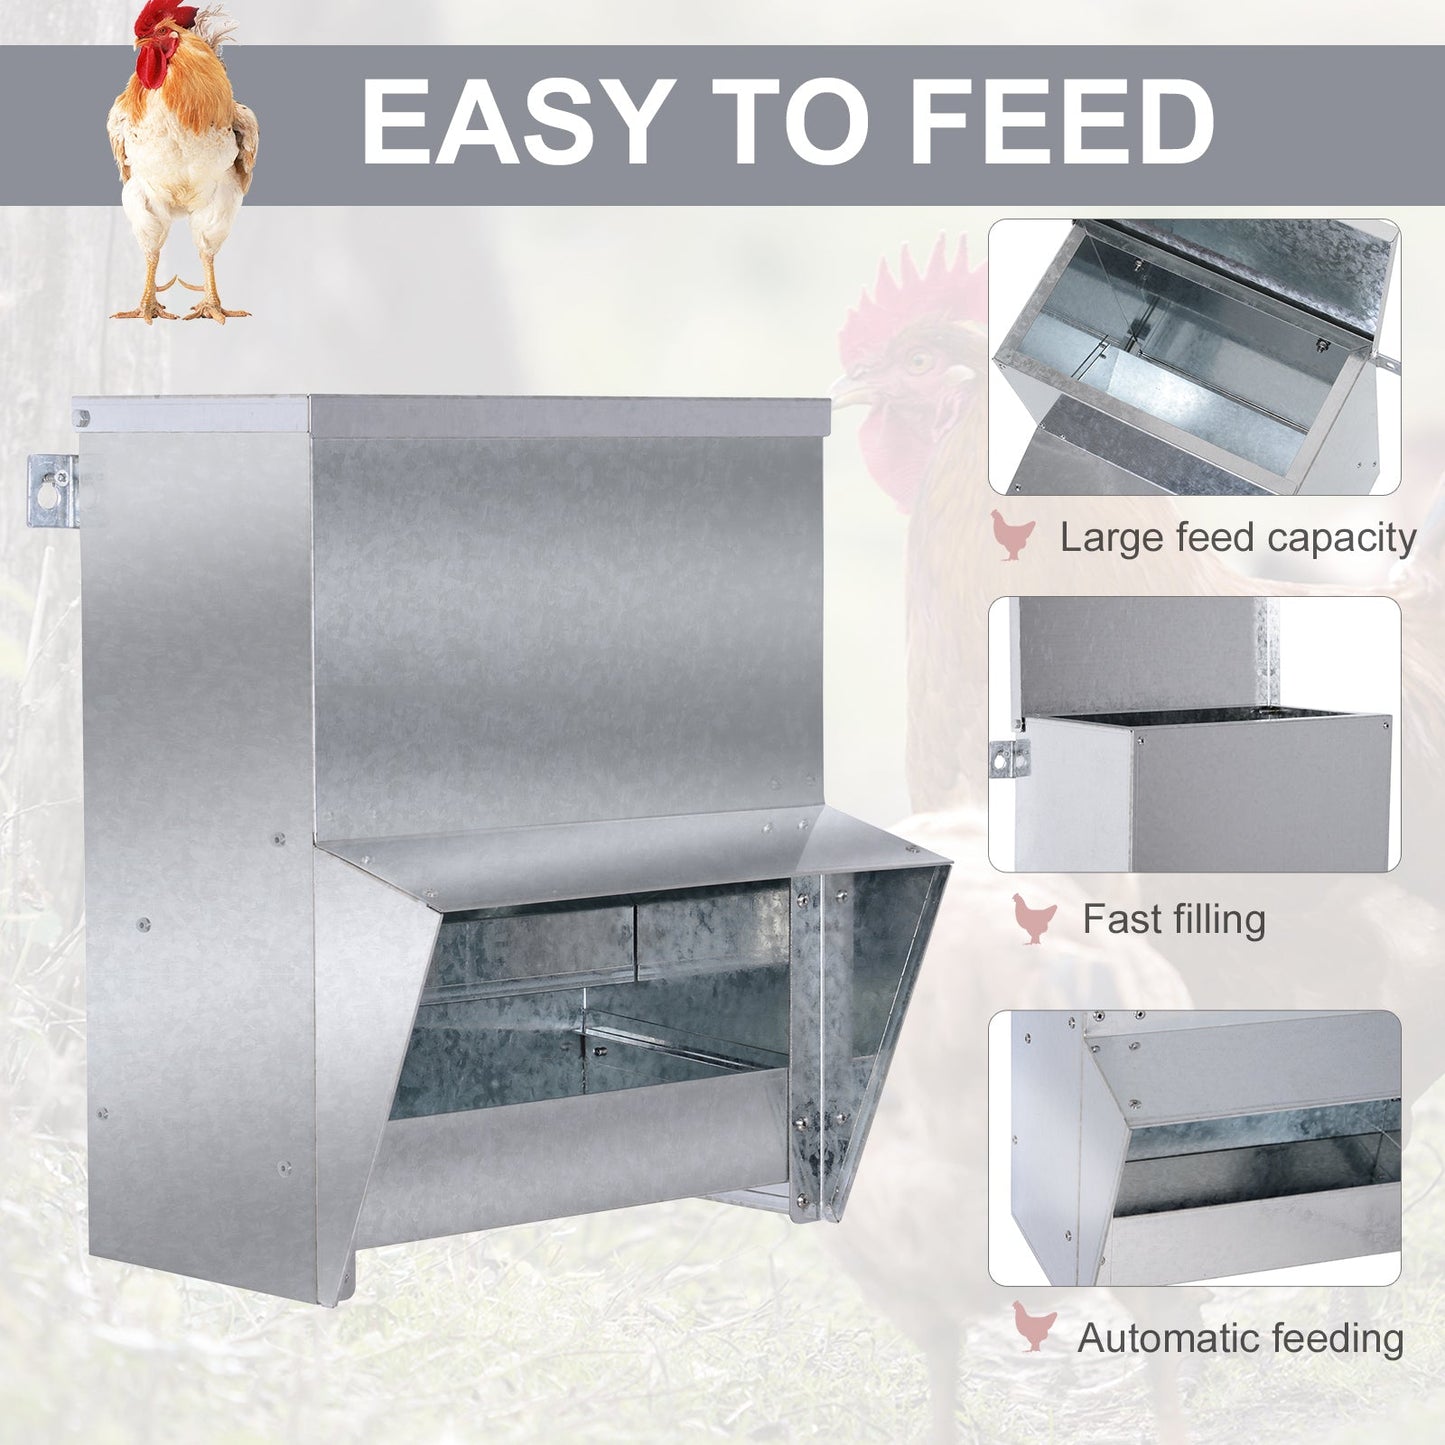 Miscellaneous-Automatic Chicken Feeder No Waste Large Poultry Feeders Rat Proof Galvanized Steel Size for 4 Chickens Holds up to 13 L of Feeds - Outdoor Style Company